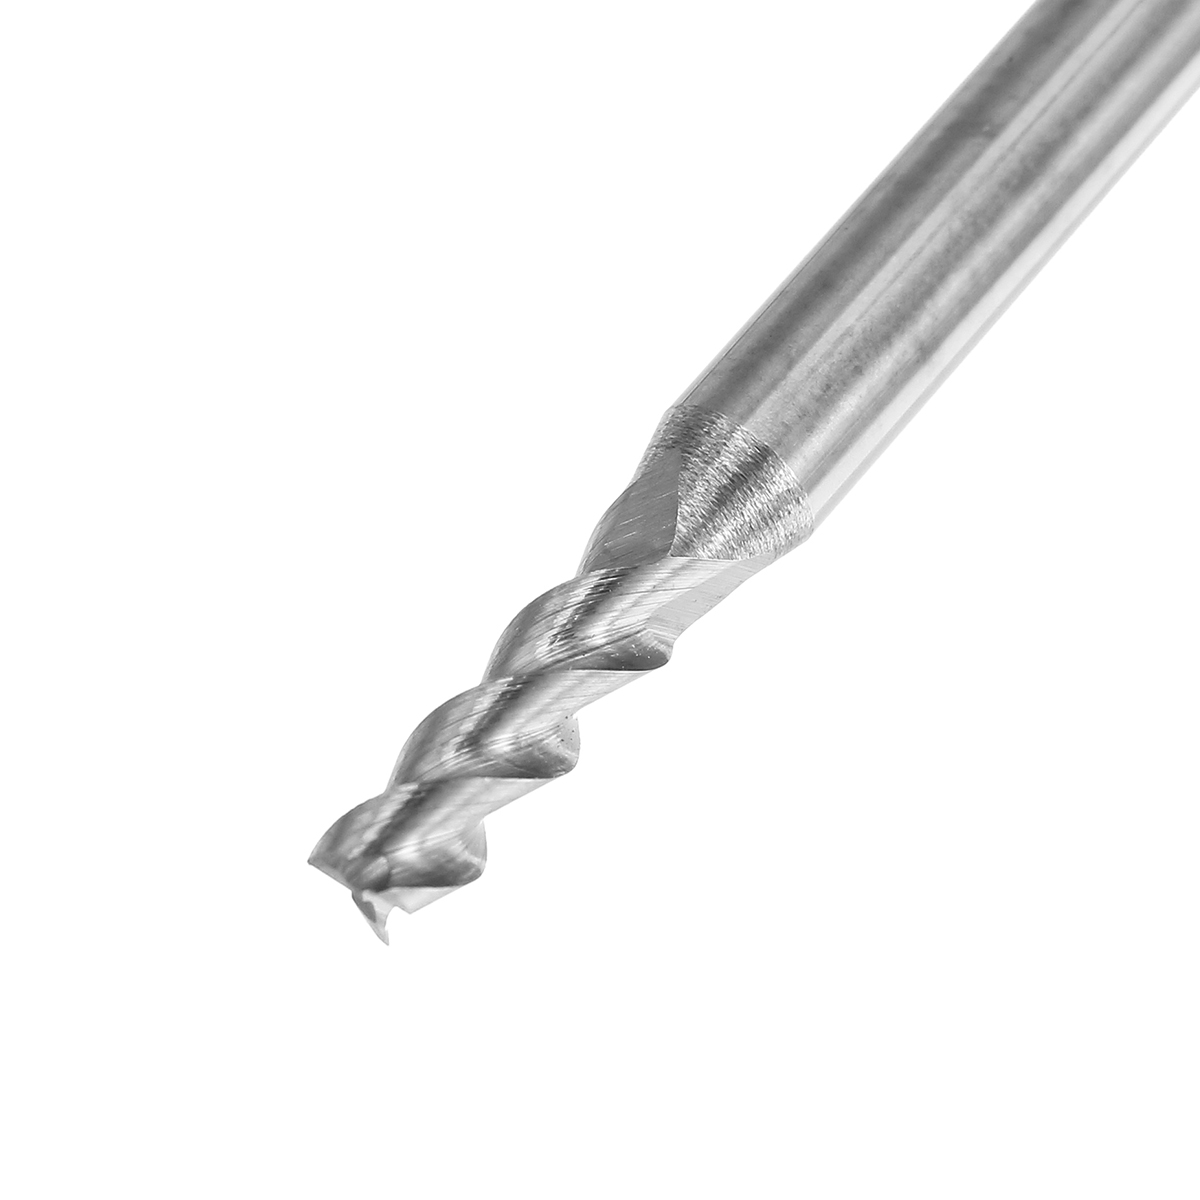 1-4mm-3-Flutes-End-Mill-Cutter-11522534mm-HRC55-Tungsten-Carbide-CNC-Milling-Tool-for-Aluminum-1542934-7